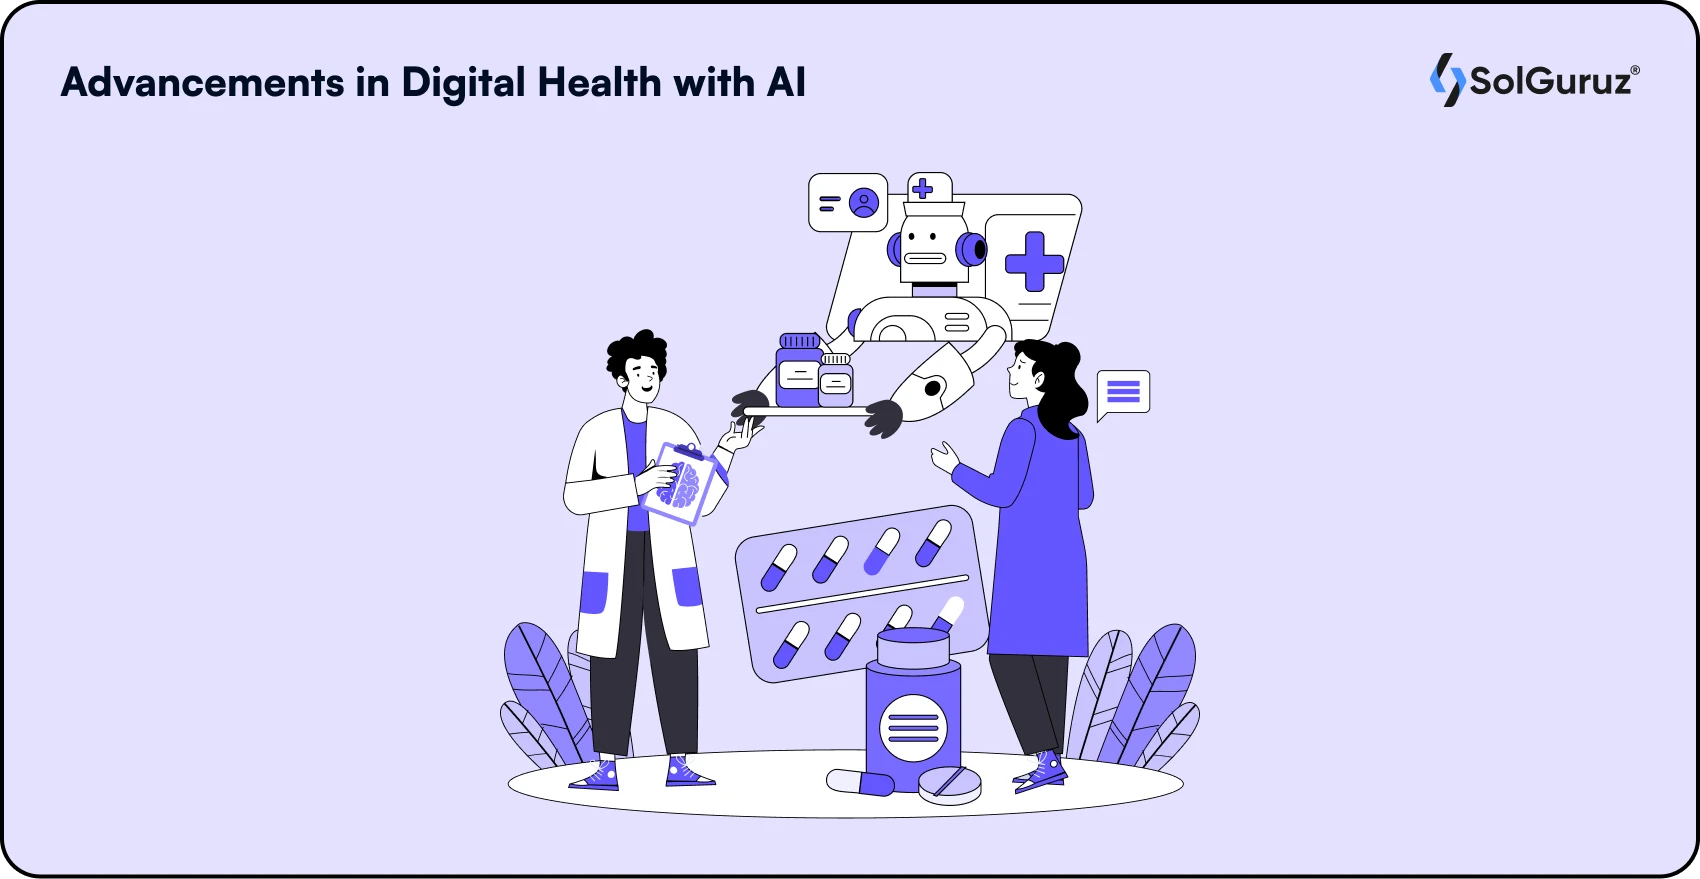 AI-Powered Health Care - Advancements in Digital Health with AI